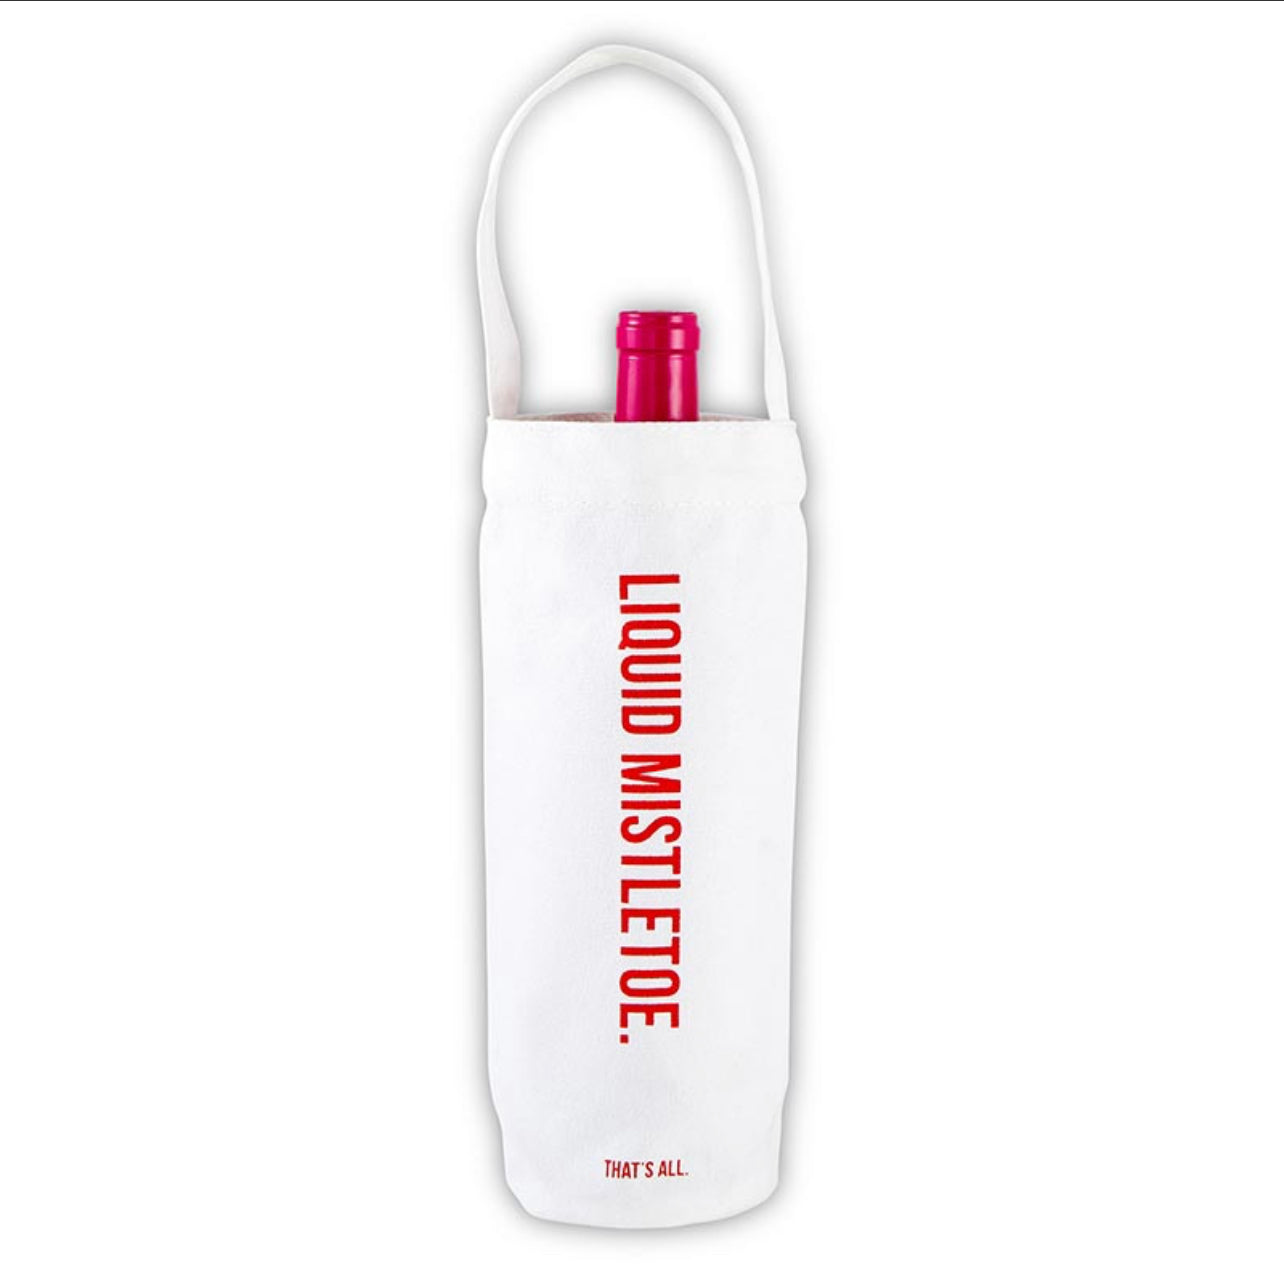 white. canvas wine bag for christmas with red script that reads "liquid mistletoe"